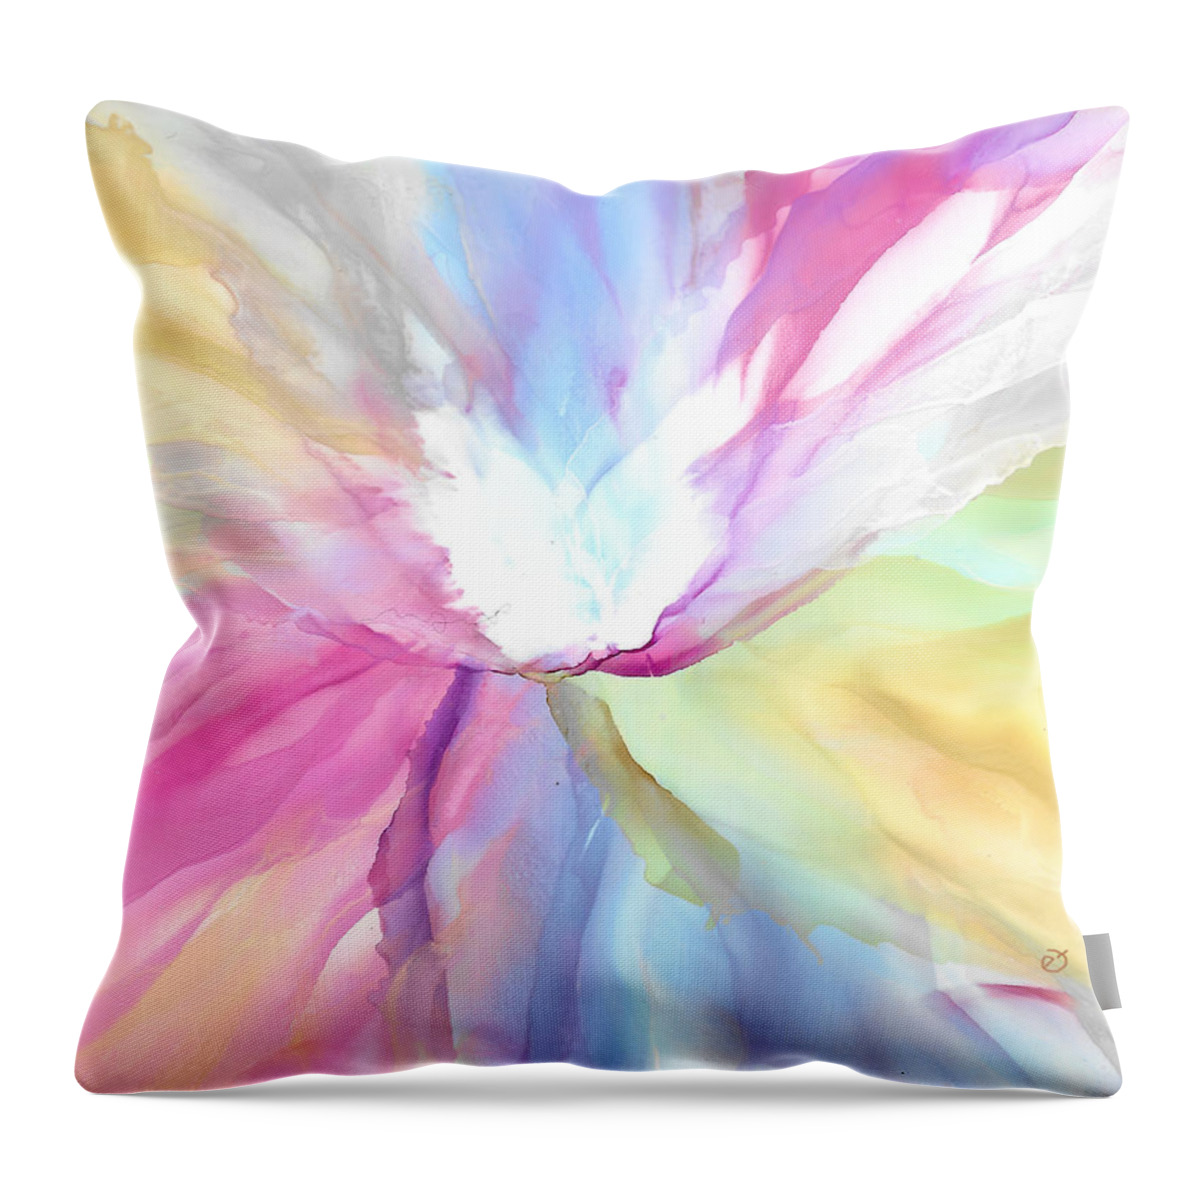 Flower Throw Pillow featuring the painting Tender Bloom by Eli Tynan